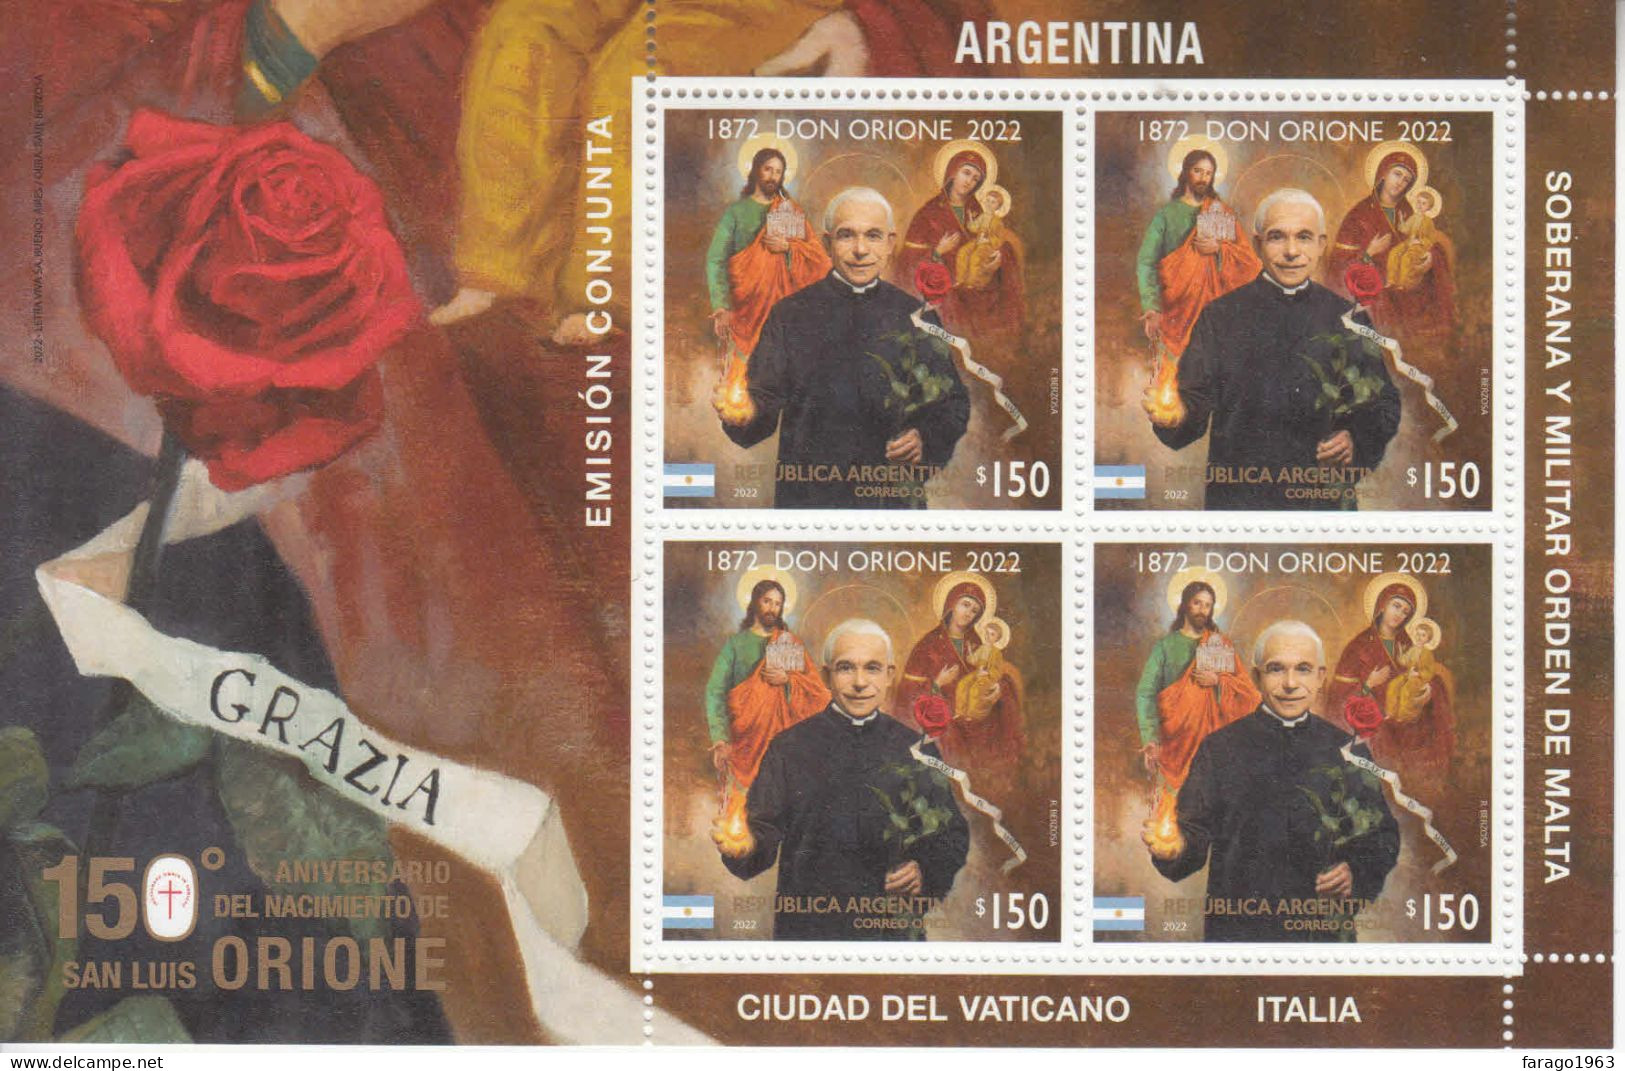 2022 Argentina Don Orione JOINT ISSUE Vatican Souvenir Sheet MNH - Nuovi